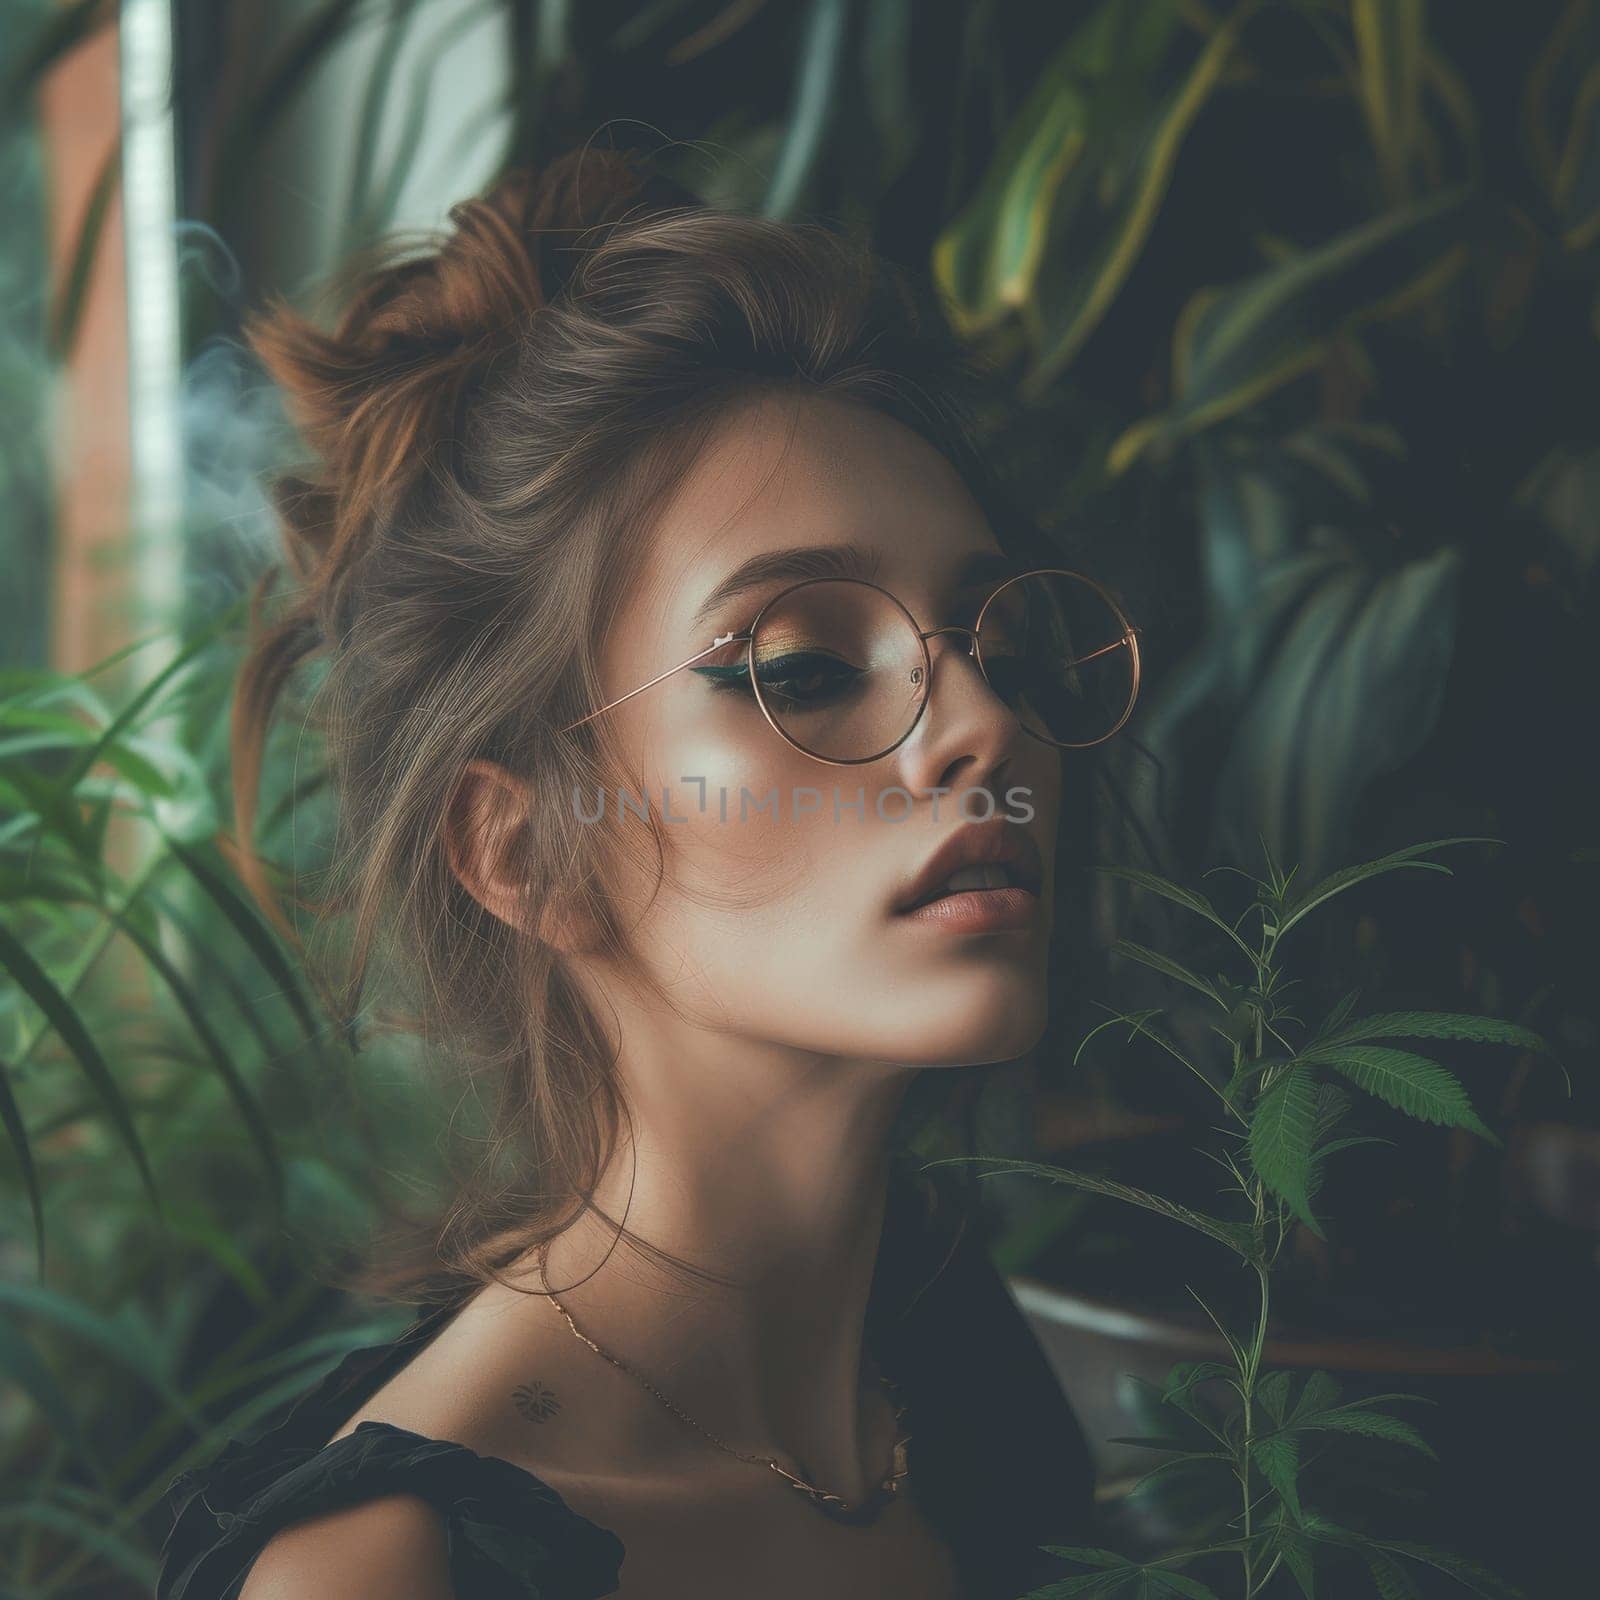 Portrait of a beautiful young woman, peacefully tending to her thriving marijuana plants in a serene, natural setting. by sfinks